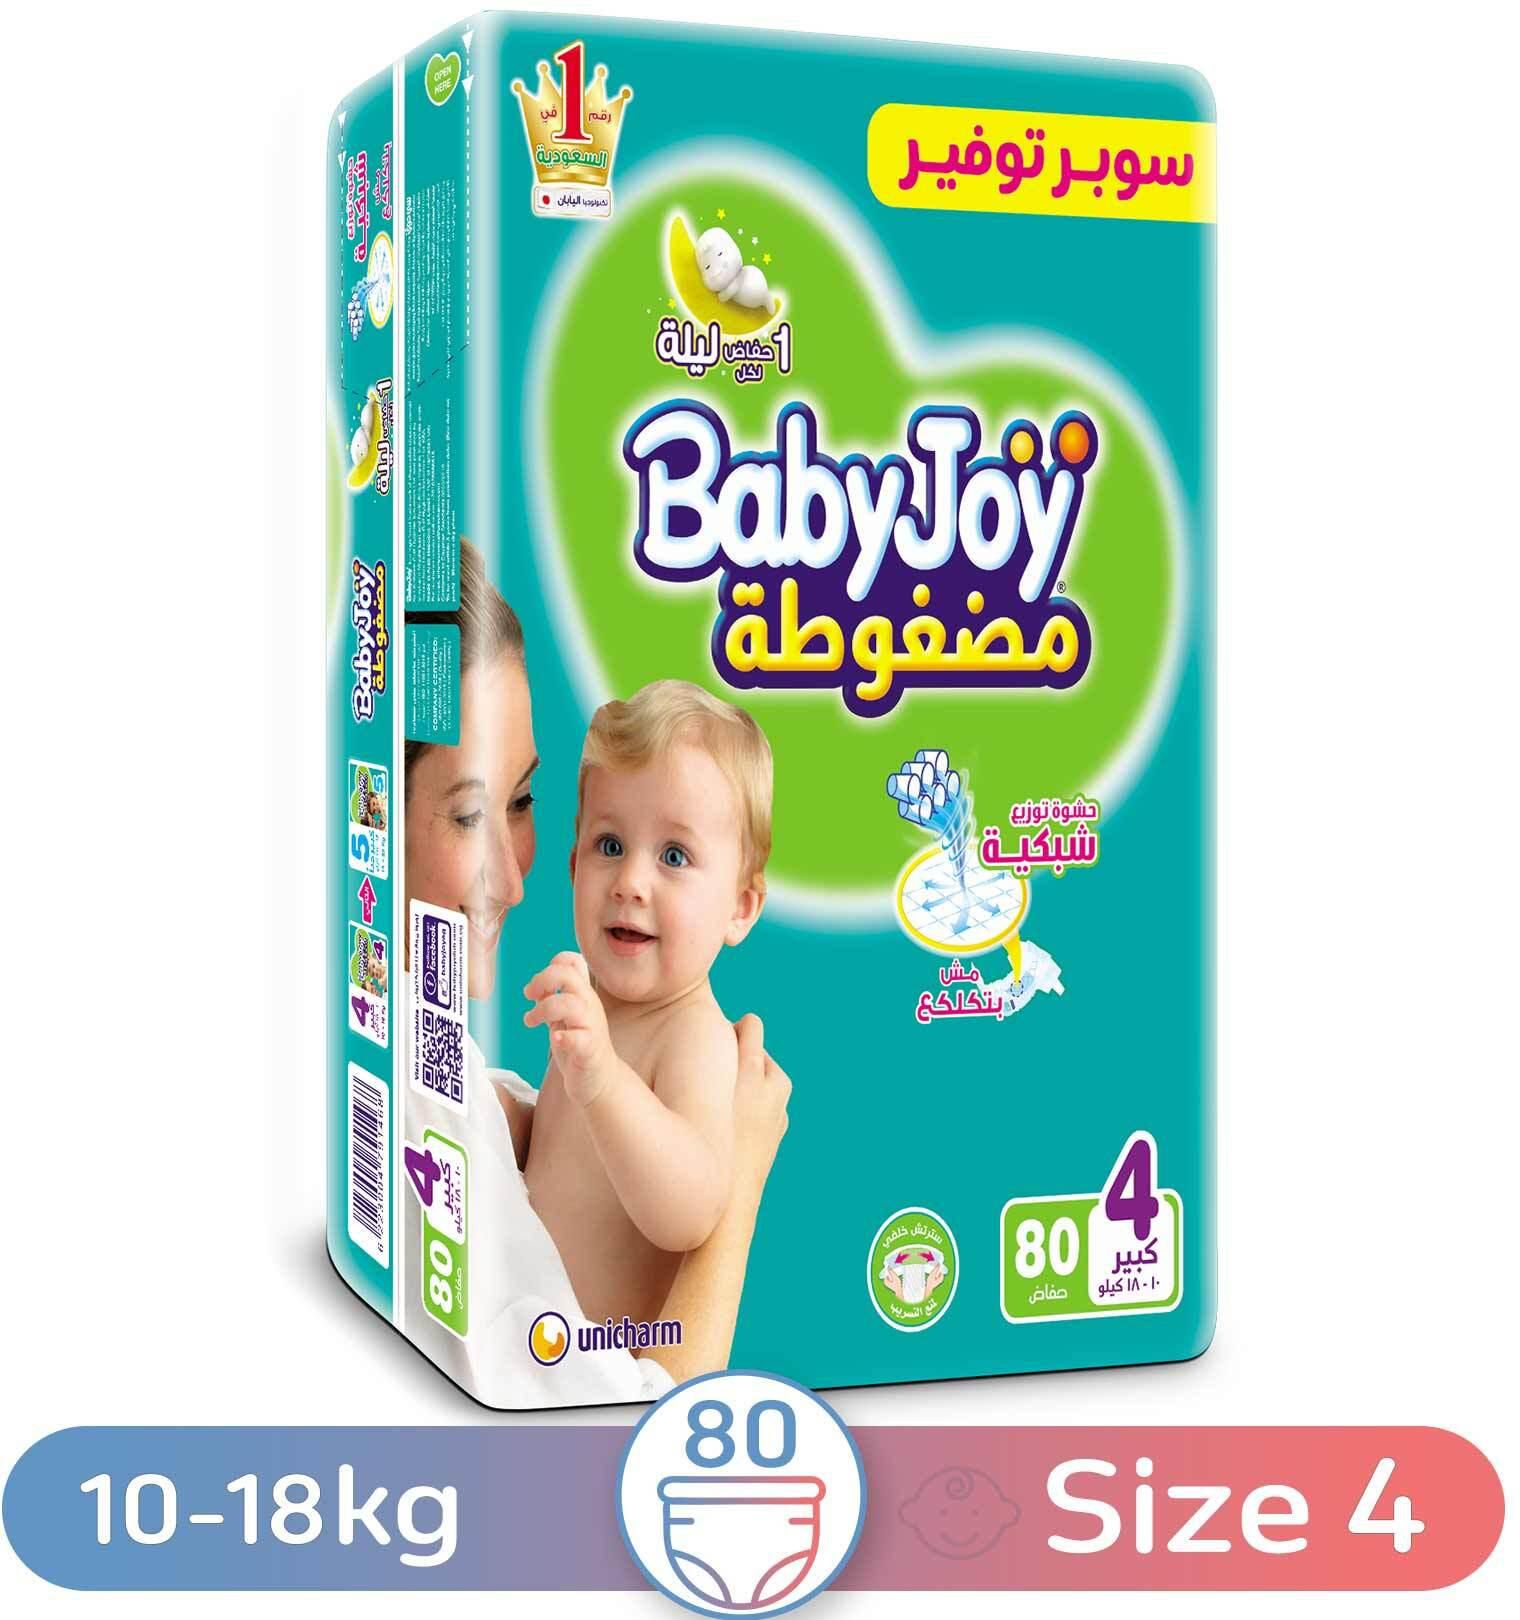 Babyjoy Stretch Diapers - Size 4 - Large - 10-18 Kg - 80 Diapers